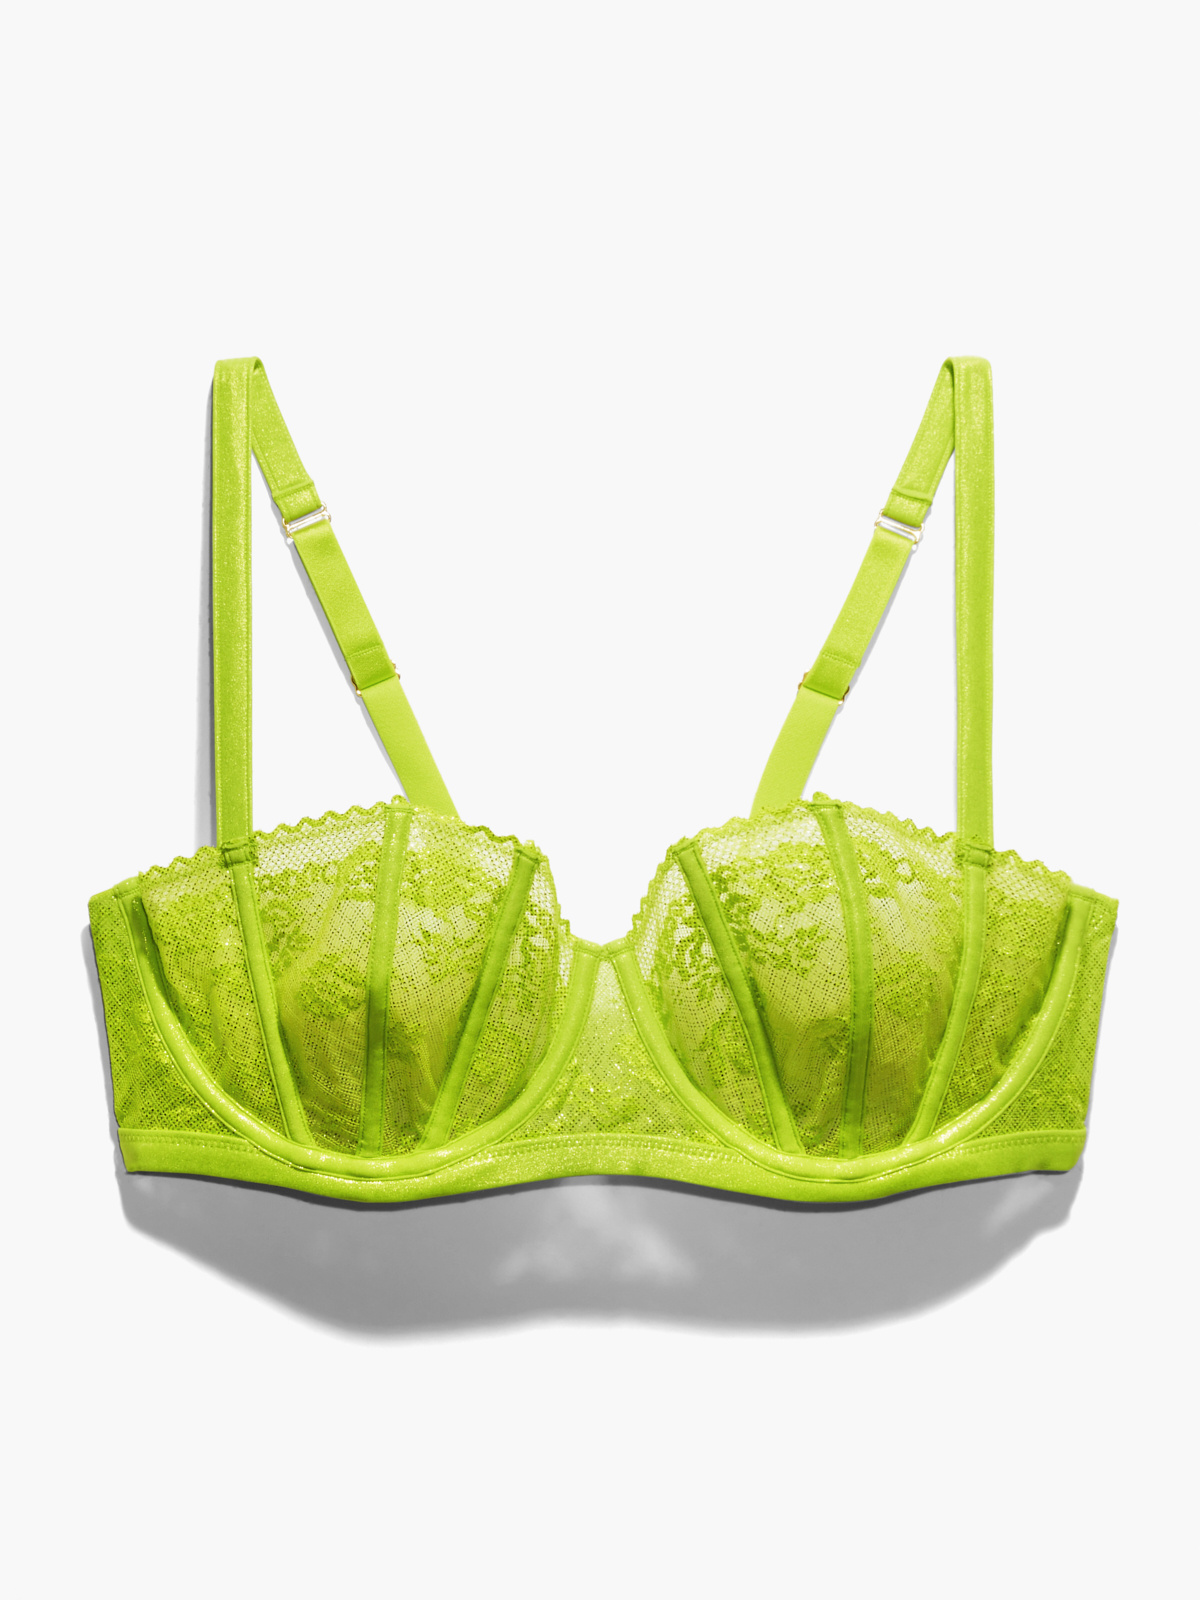 Caged Lace Unlined Balconette Bra in Green